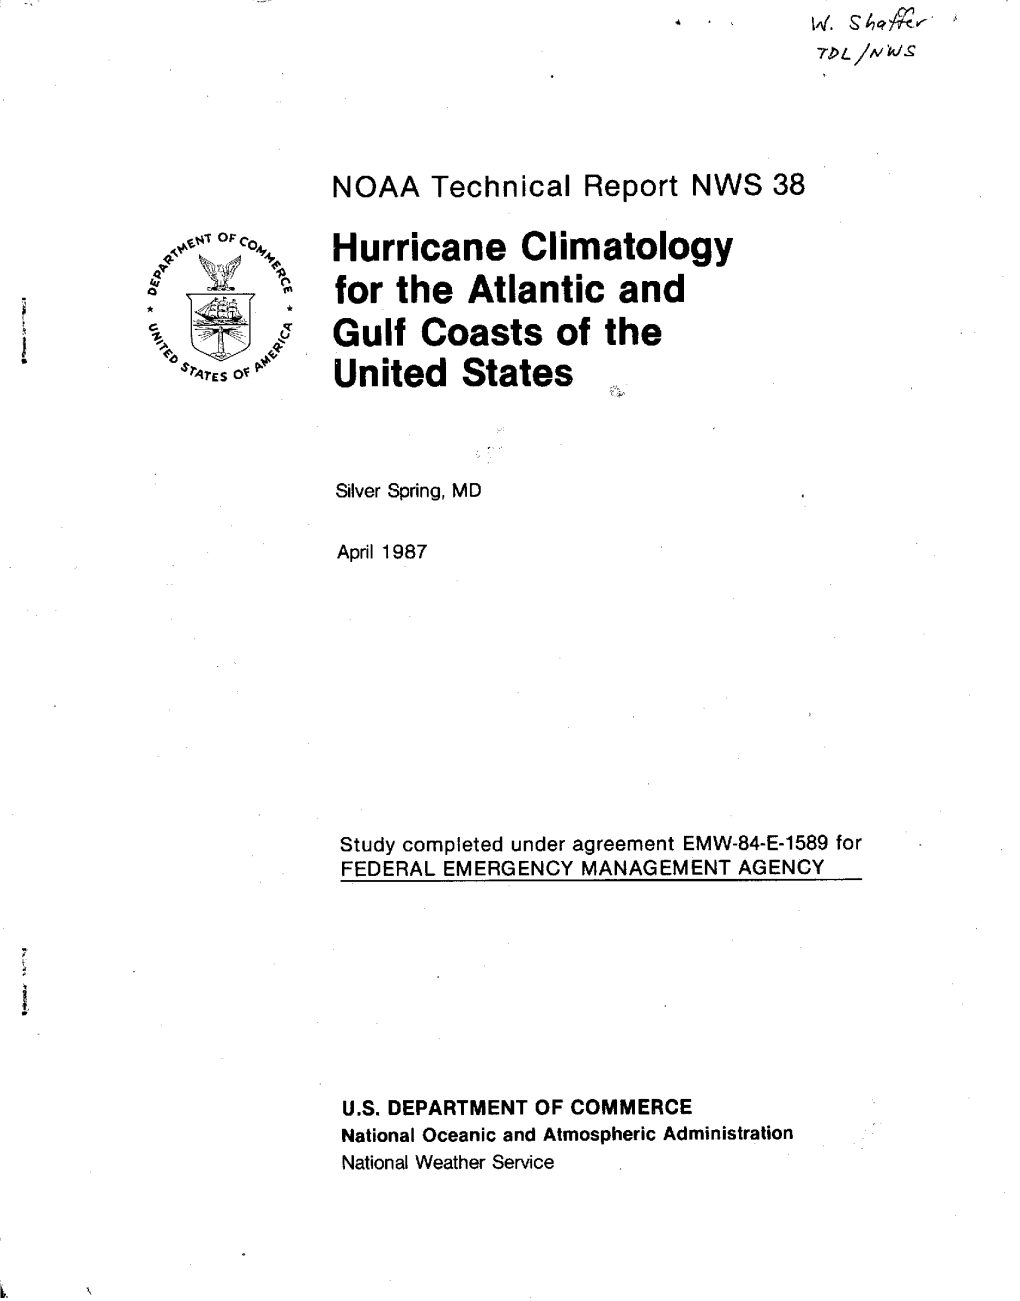 Hurricane Climatology for the Atlantic and Gulf Coasts of the United States